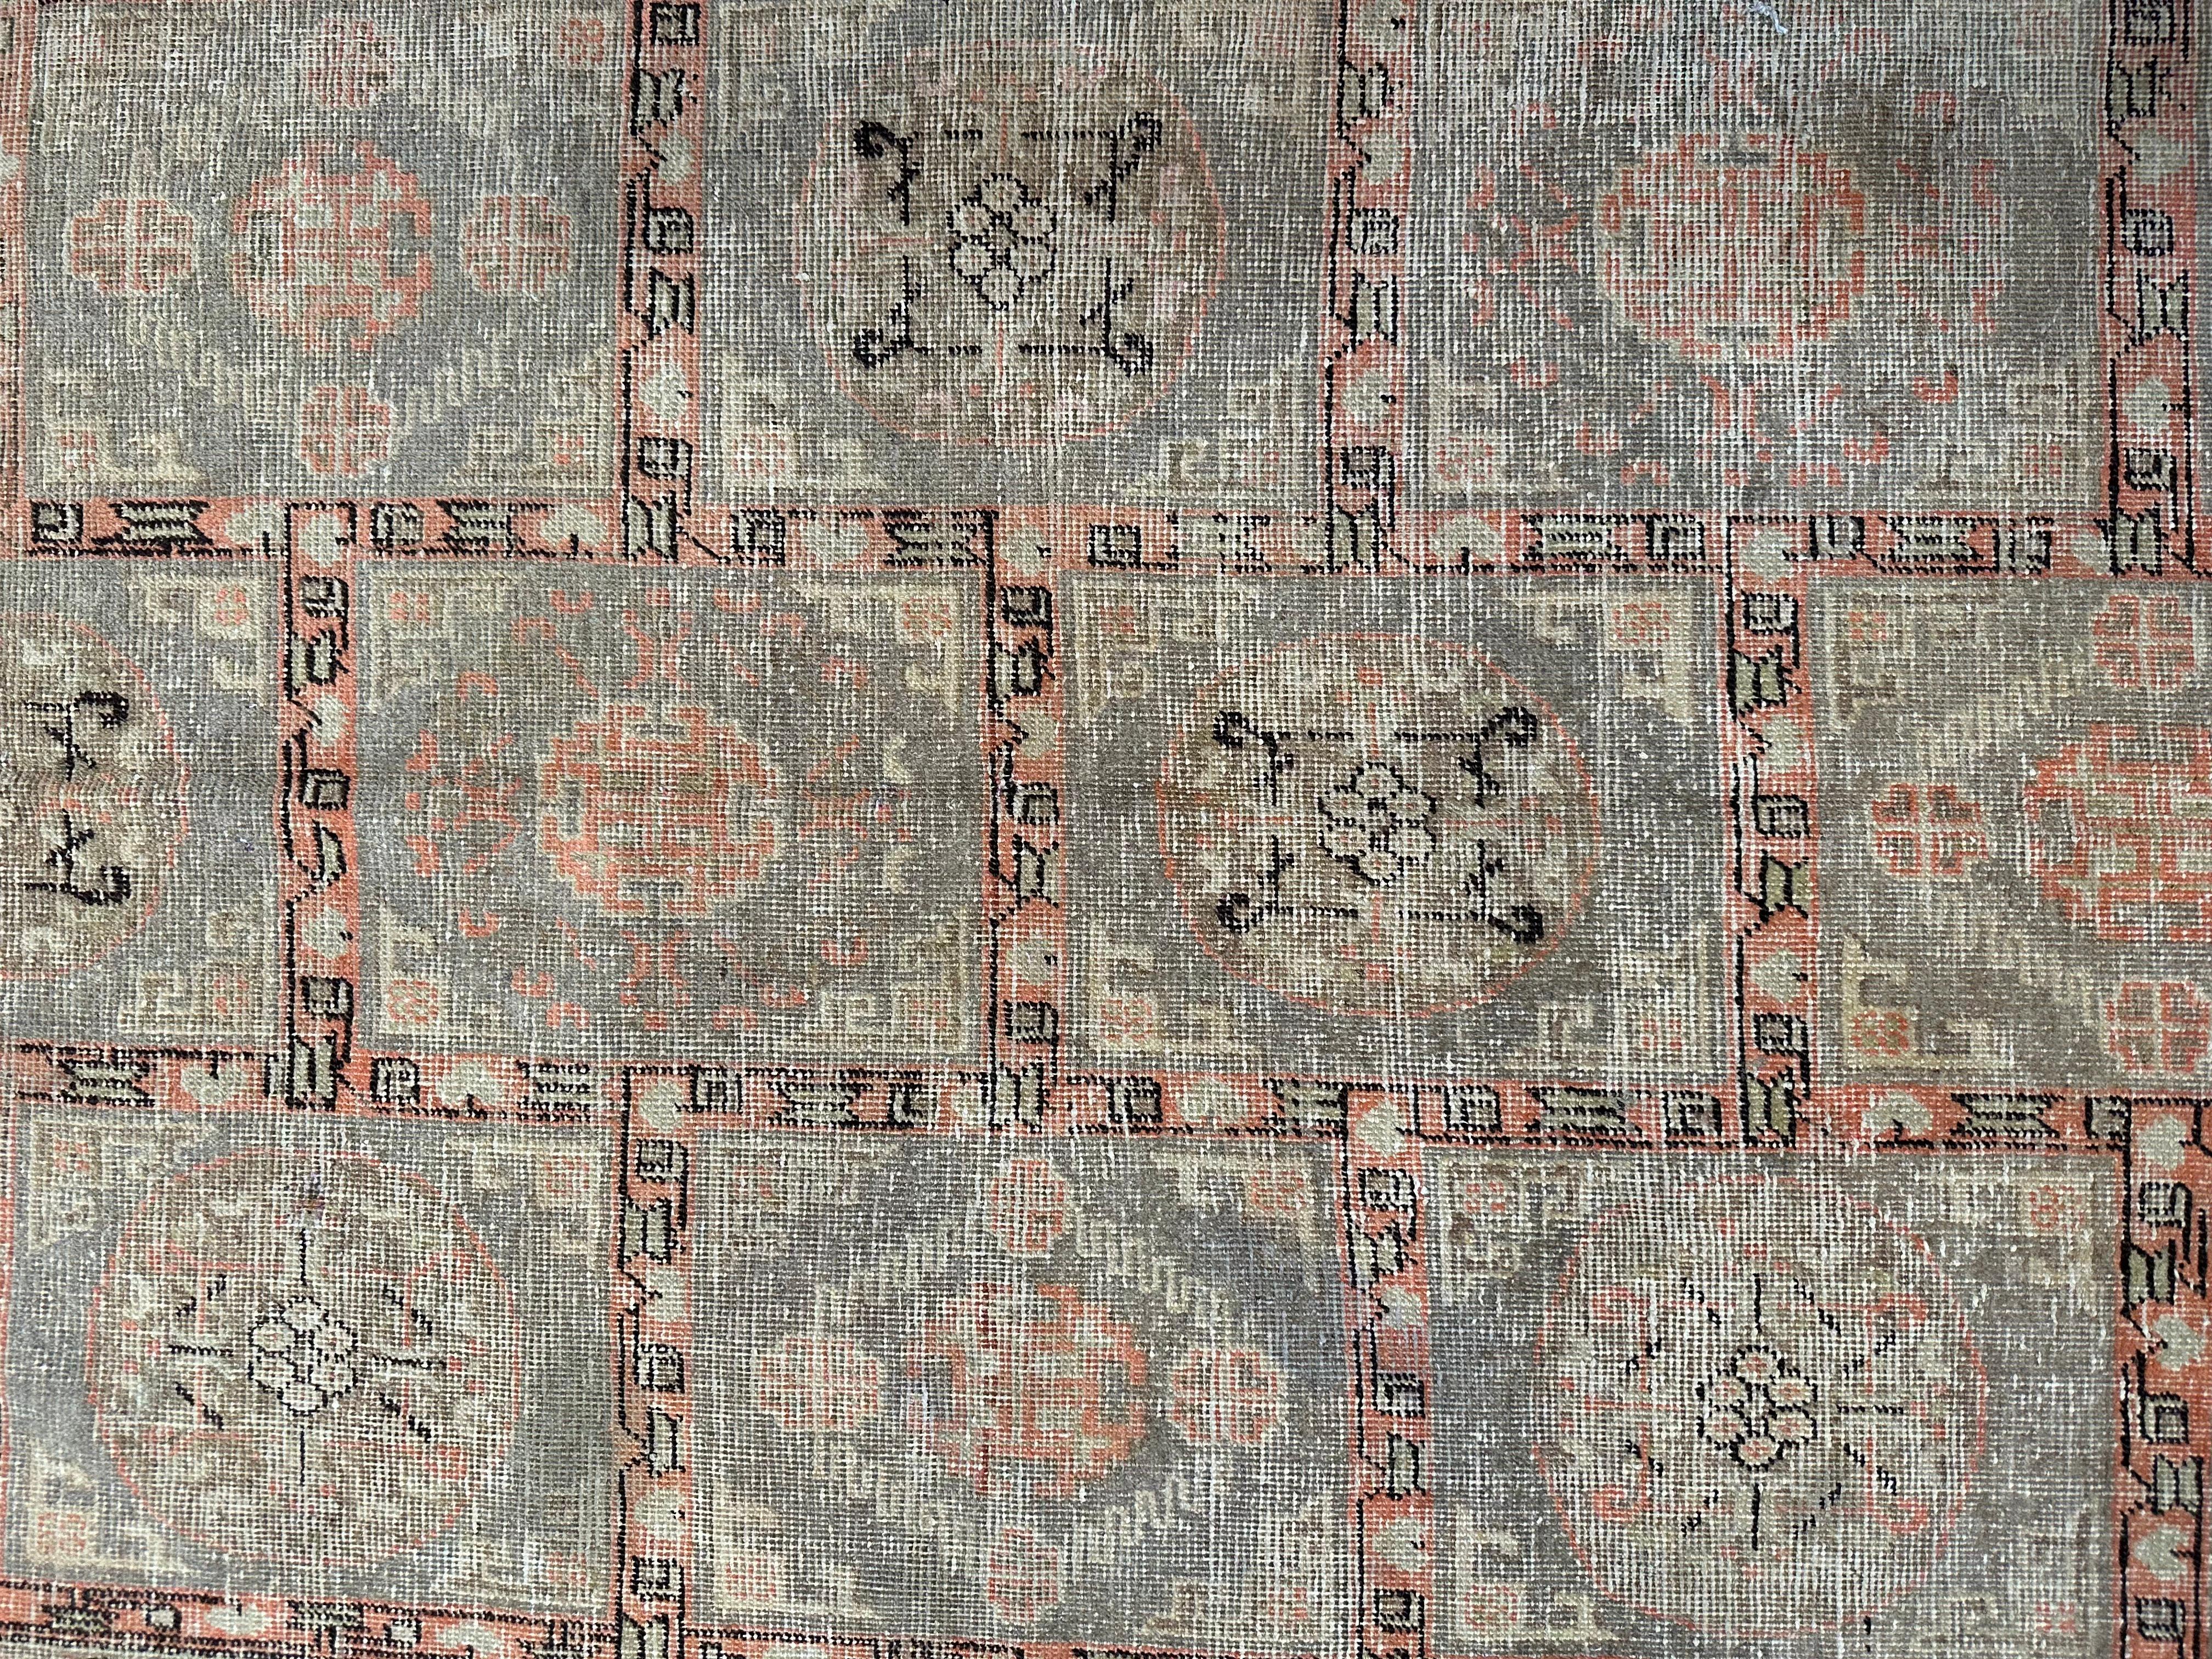 Antique Uzbek Samarkand Rug 9'7'' X 5'3'', tribal and traditional, antique and vintage, wool on cotton foundation